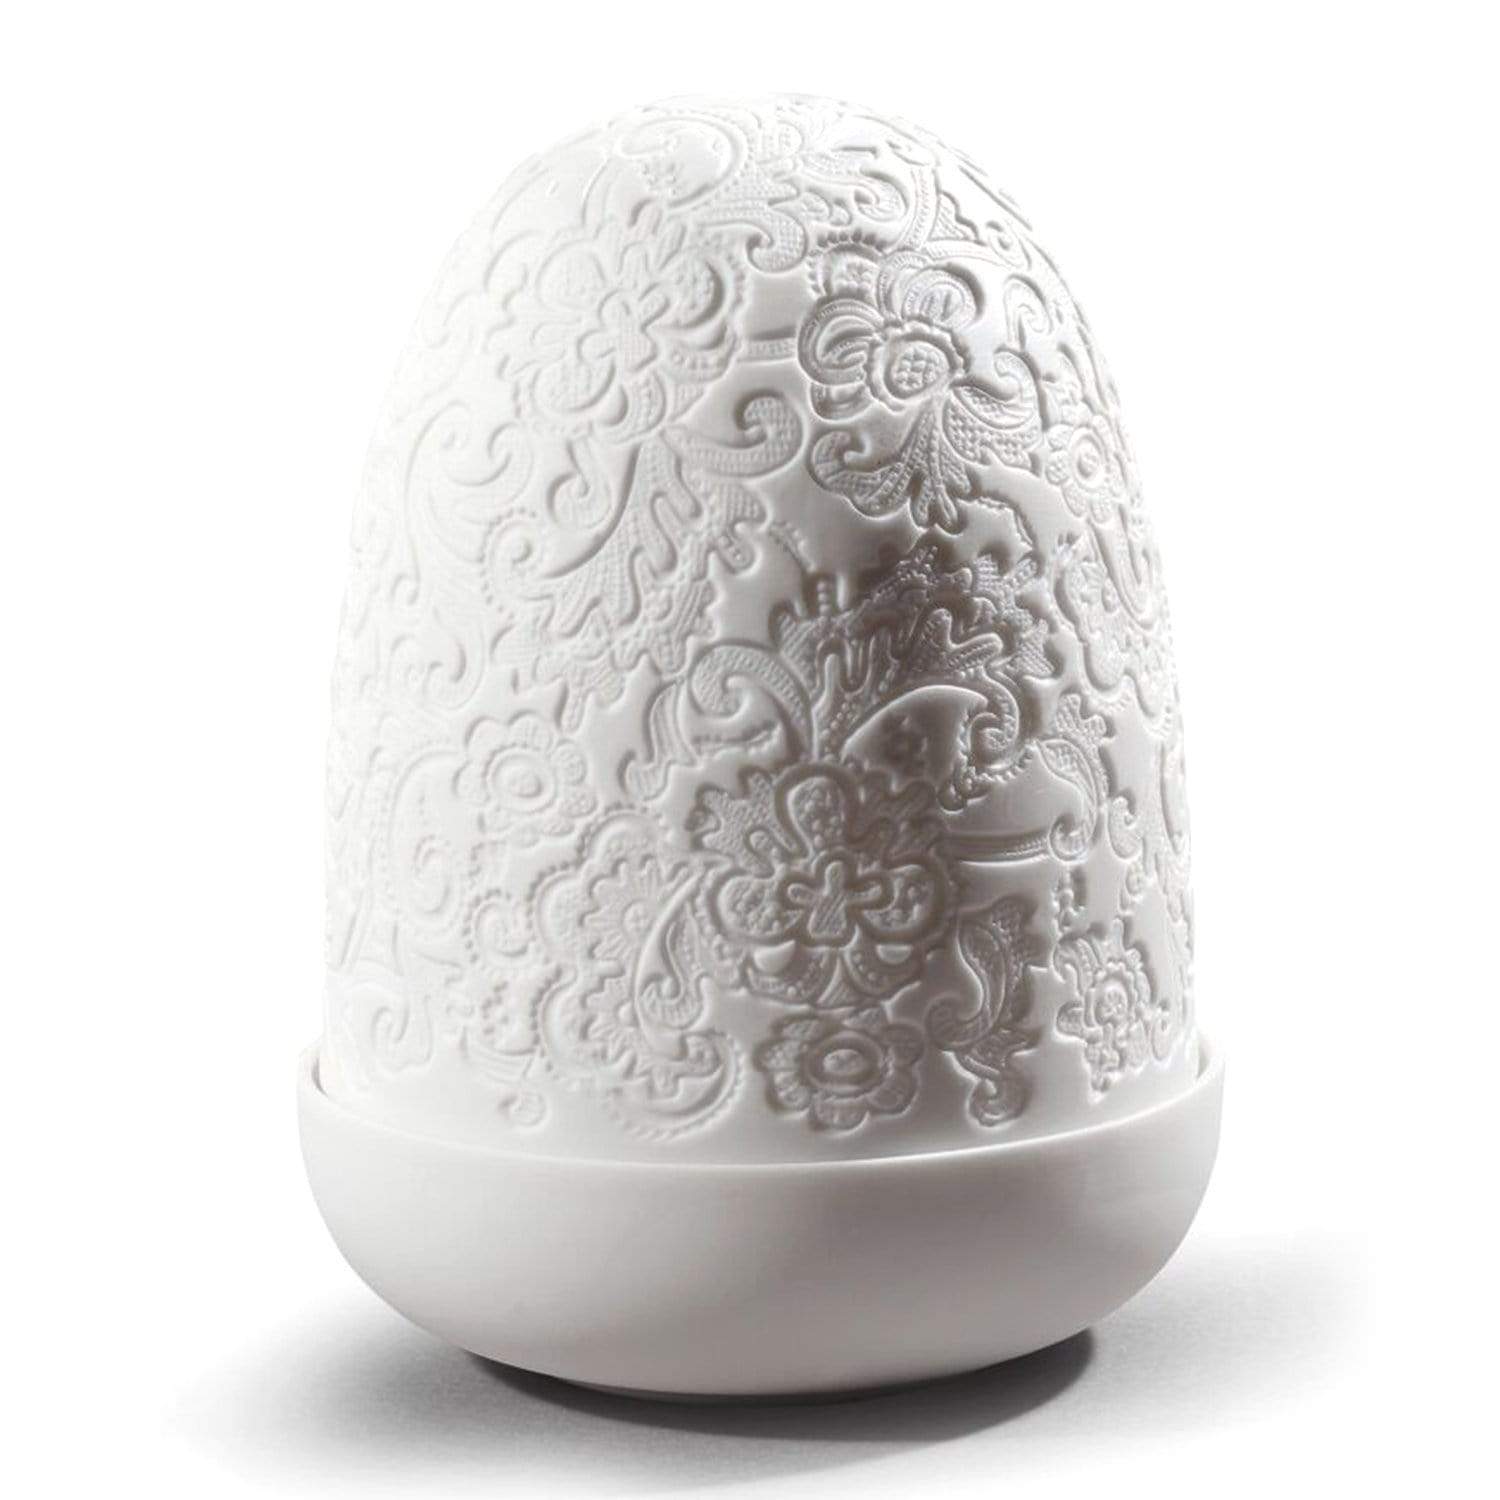 Lladro Lace Dome Table Lamp - 1023890 - Jashanmal Home